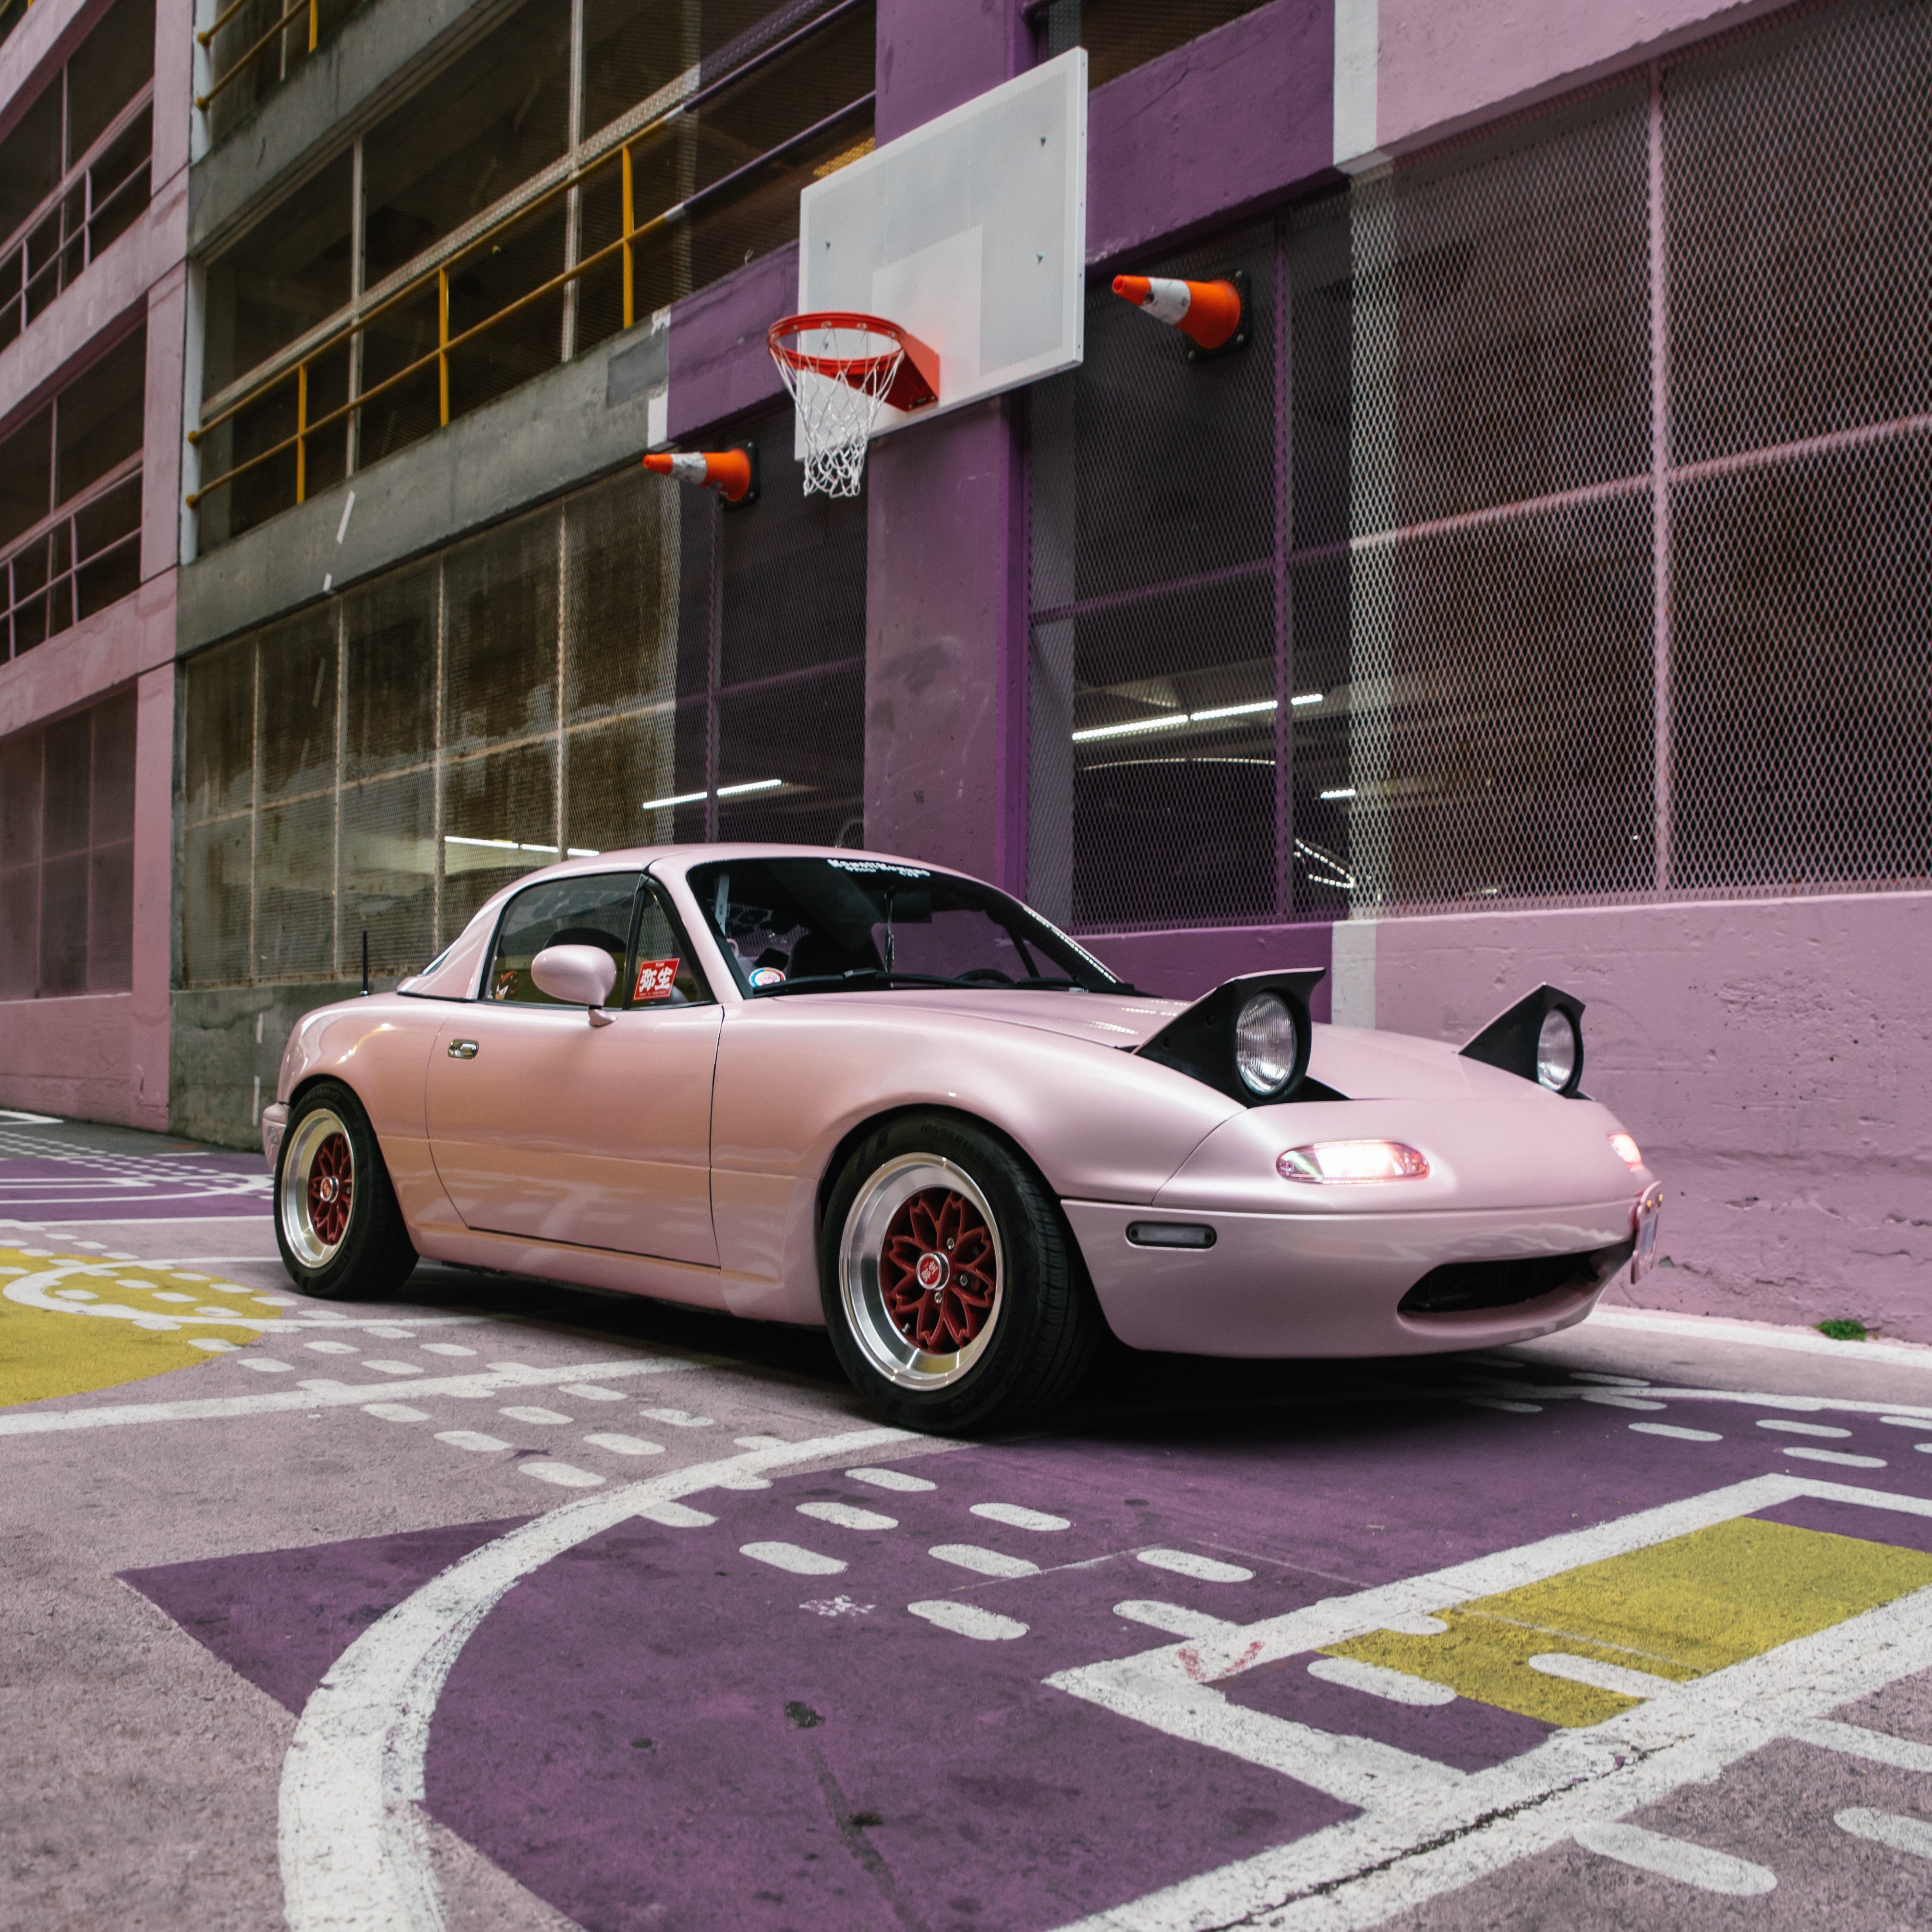 pink mx5 mazda miata in a colorful alleyway in vancouver on hayashi yayoi wheels with heart shaped lights. Famous car from tiktok